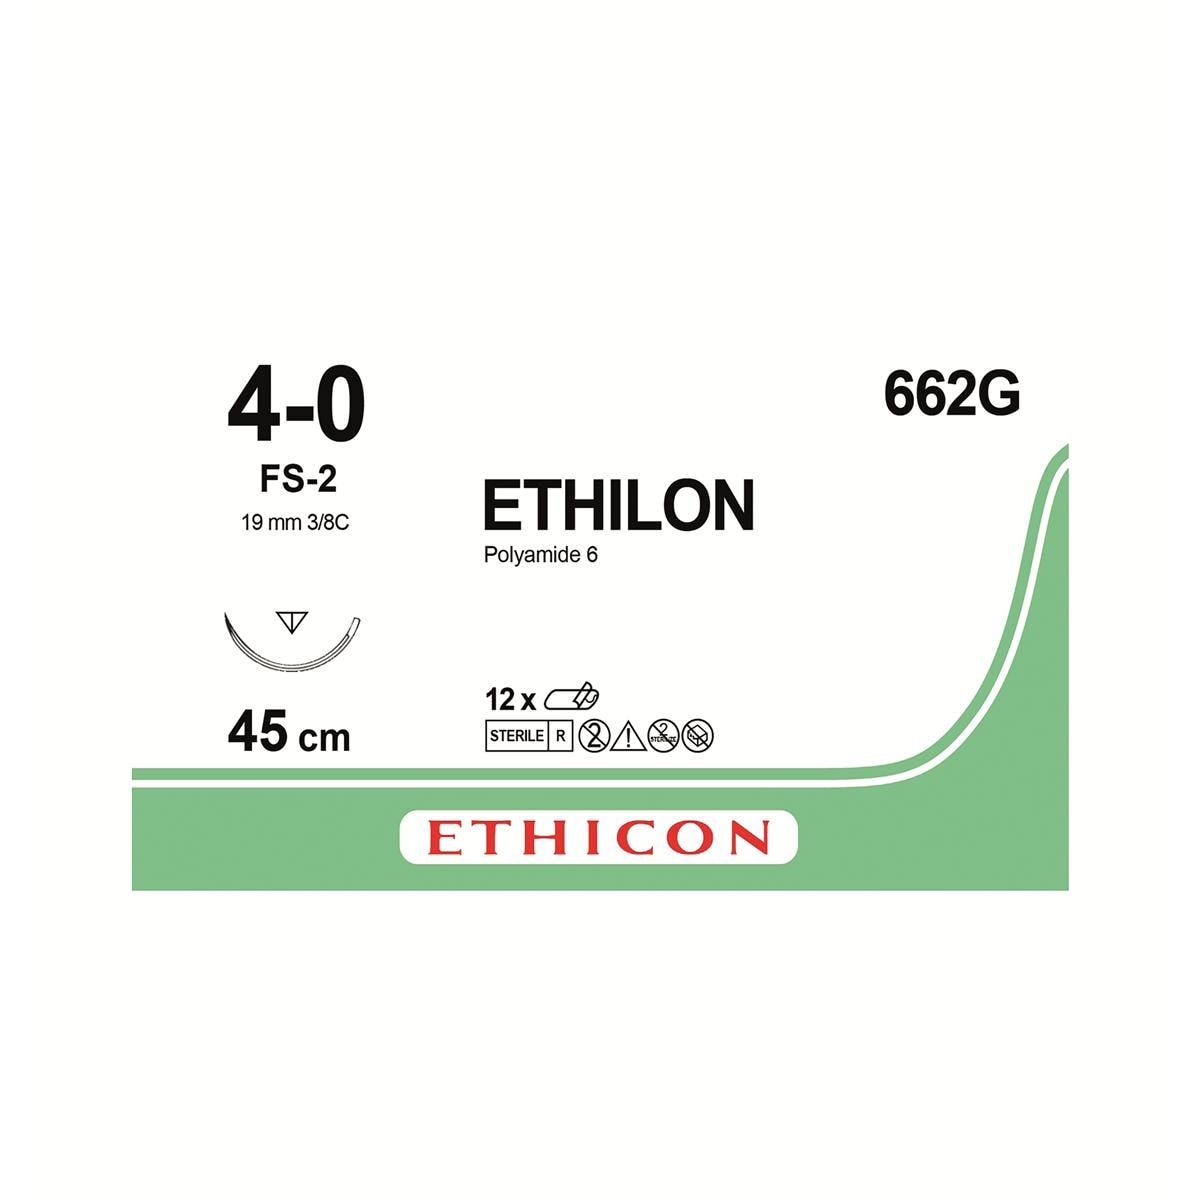 Ethilon Sutures Silver Uncoated 45cm 4-0 3/8 Circle Cutting Edge Reverse FS-2 19mm 662G 12pk